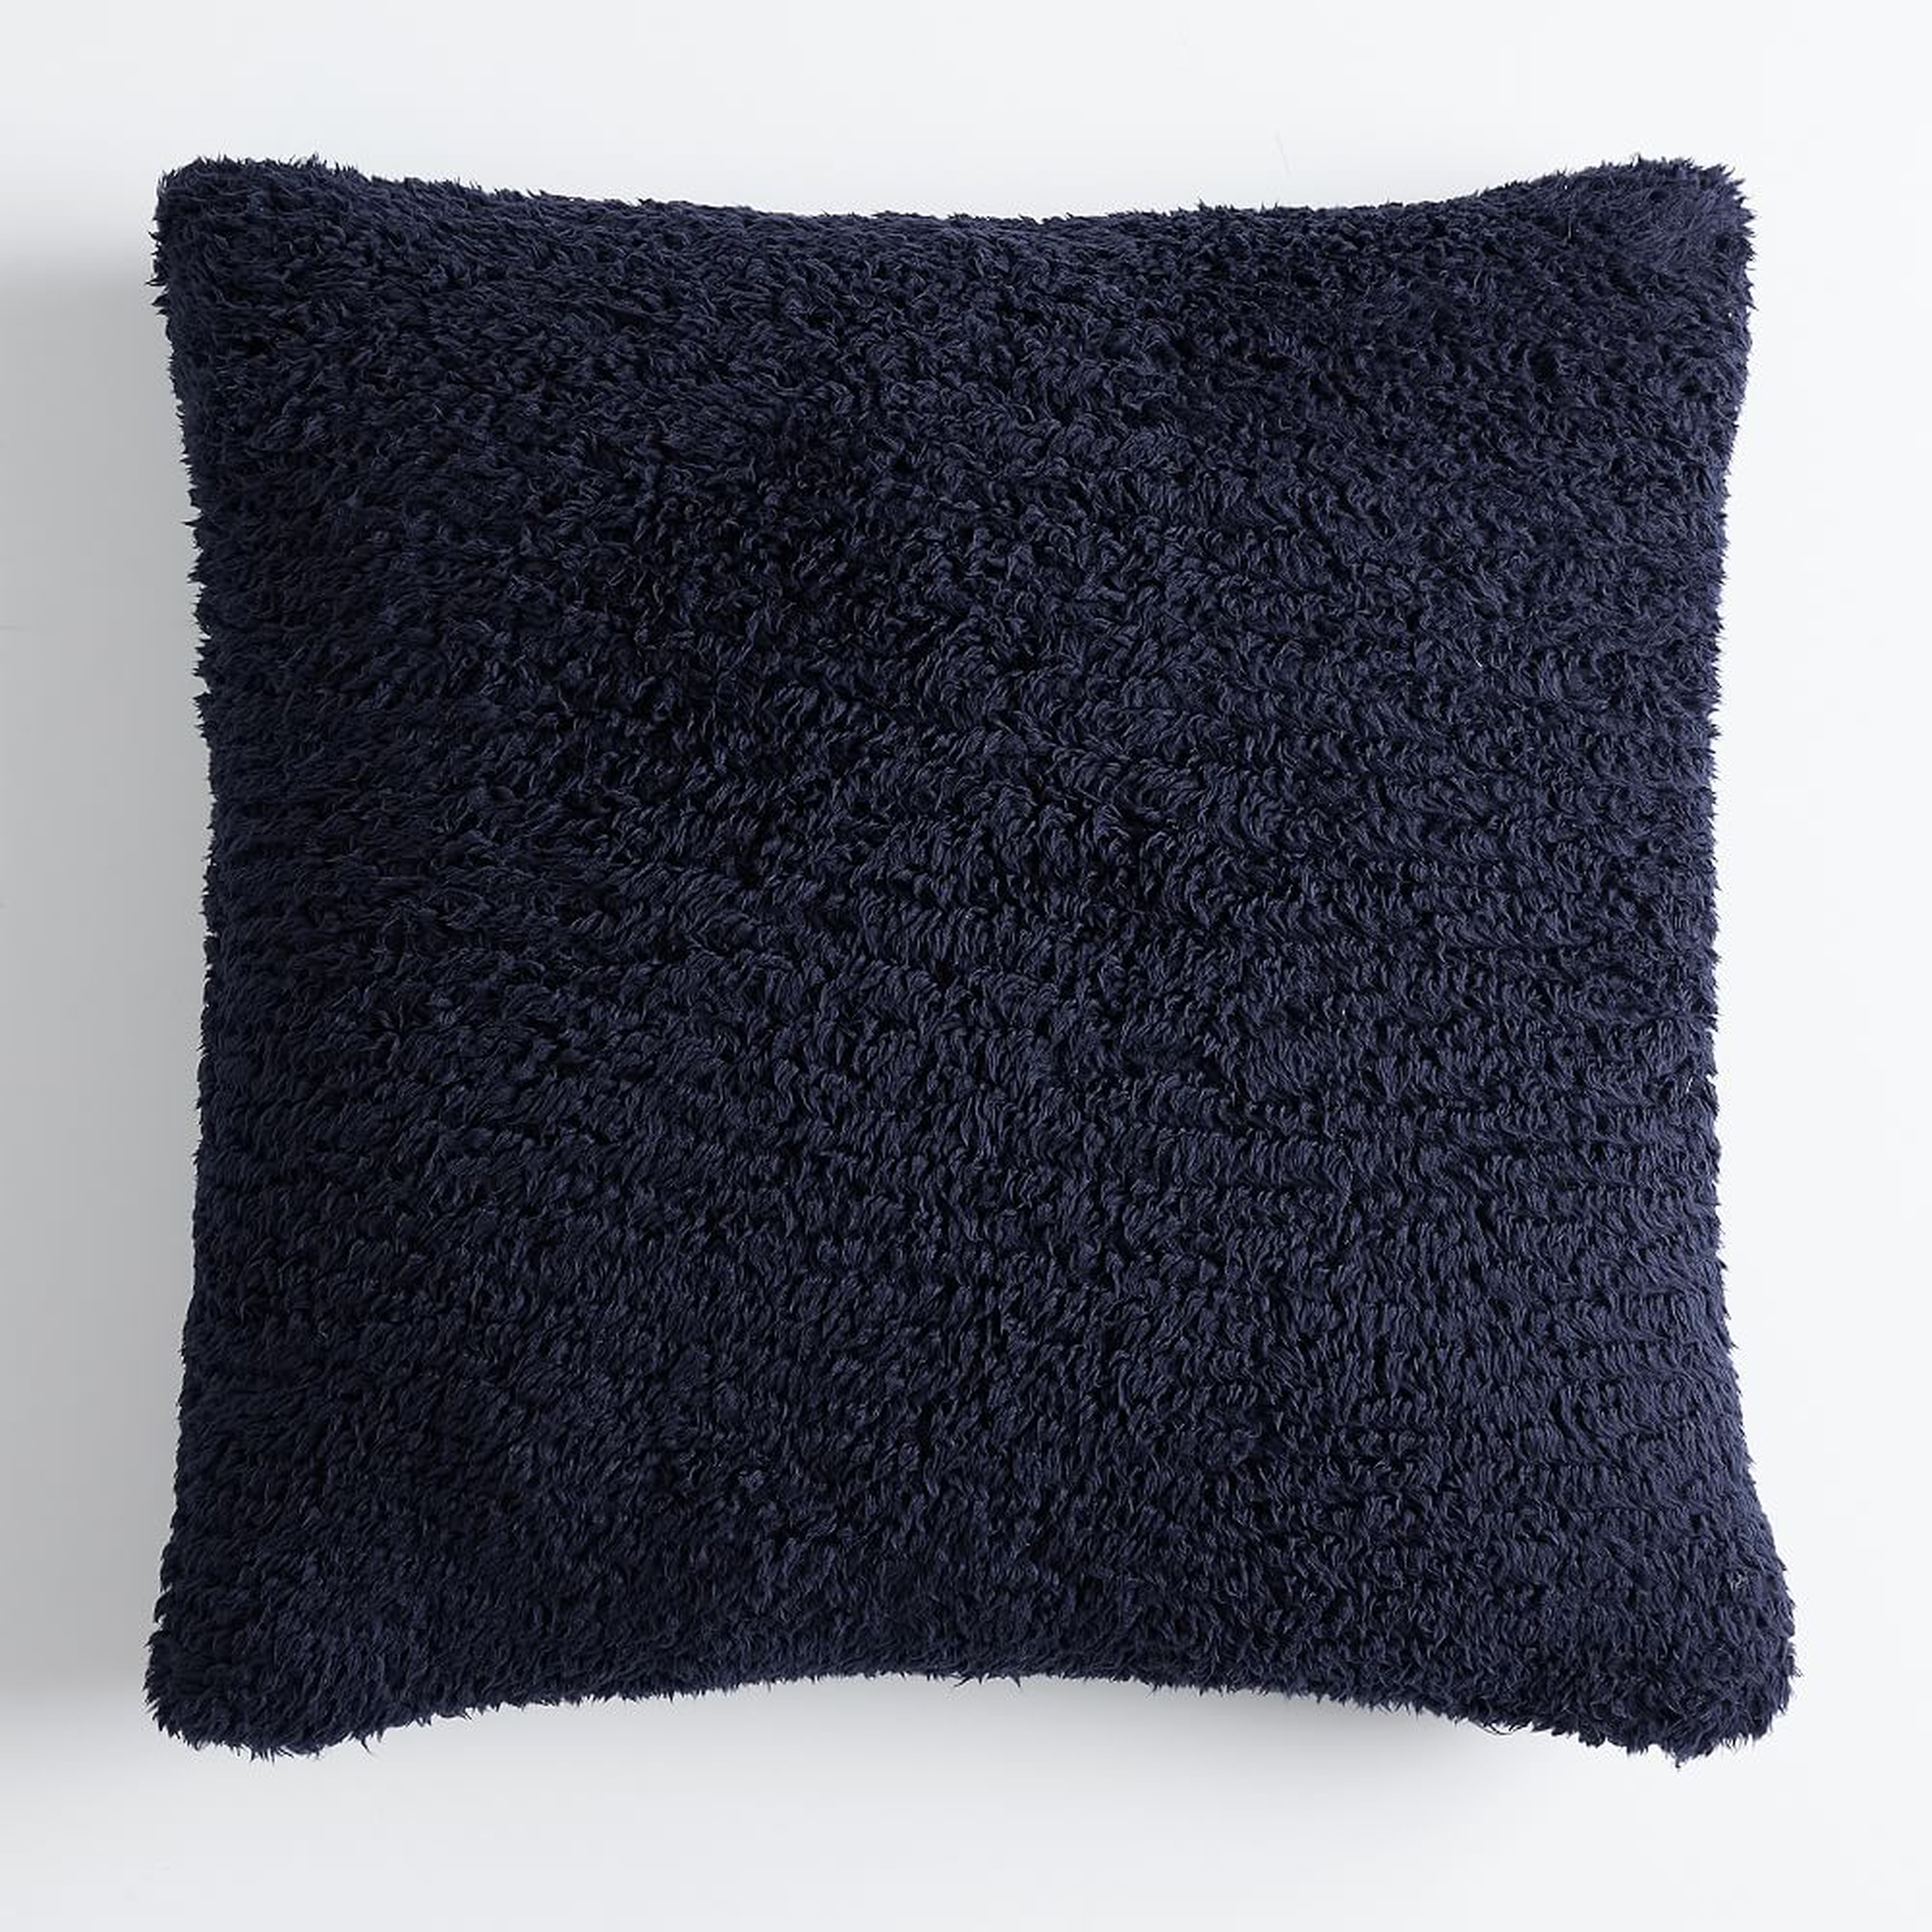 Cozy Euro Recycled Sherpa Pillow Cover, 26x26, Classic Navy - Pottery Barn Teen